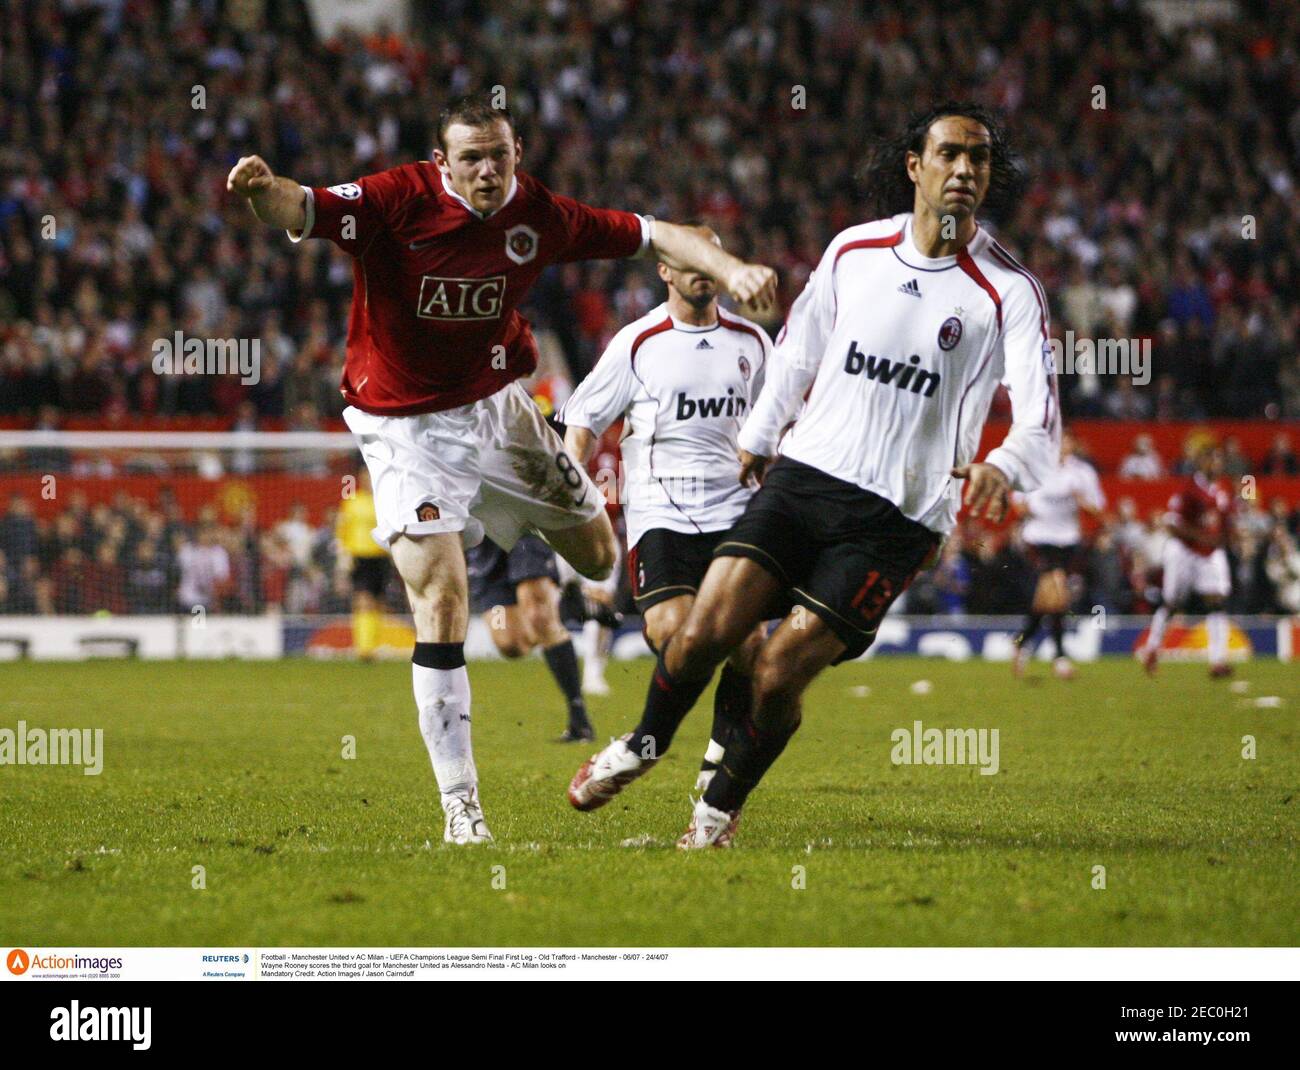 Football - Manchester United v AC Milan - UEFA Champions League Semi Final  First Leg - Old Trafford - Manchester - 06/07 - 24/4/07 Wayne Rooney scores  the third goal for Manchester